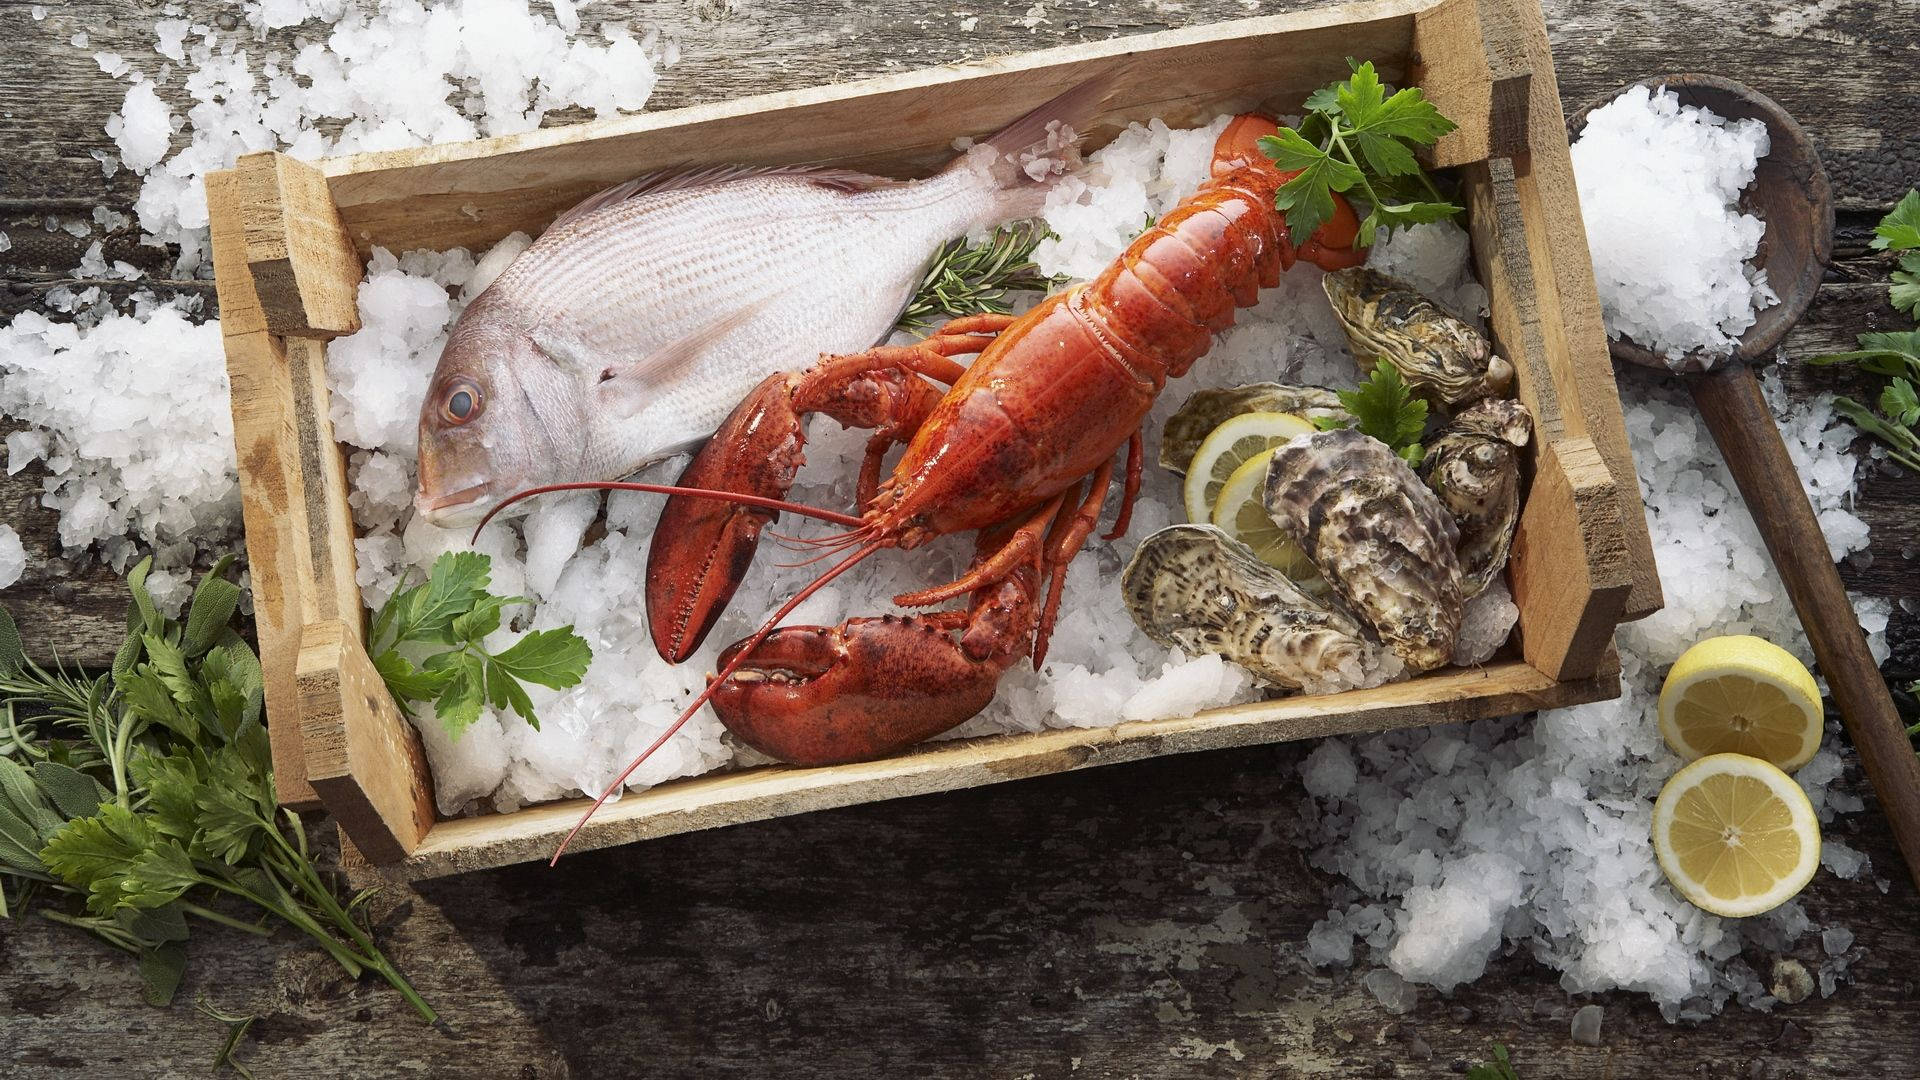 Lobster On Crate Full Of Ice